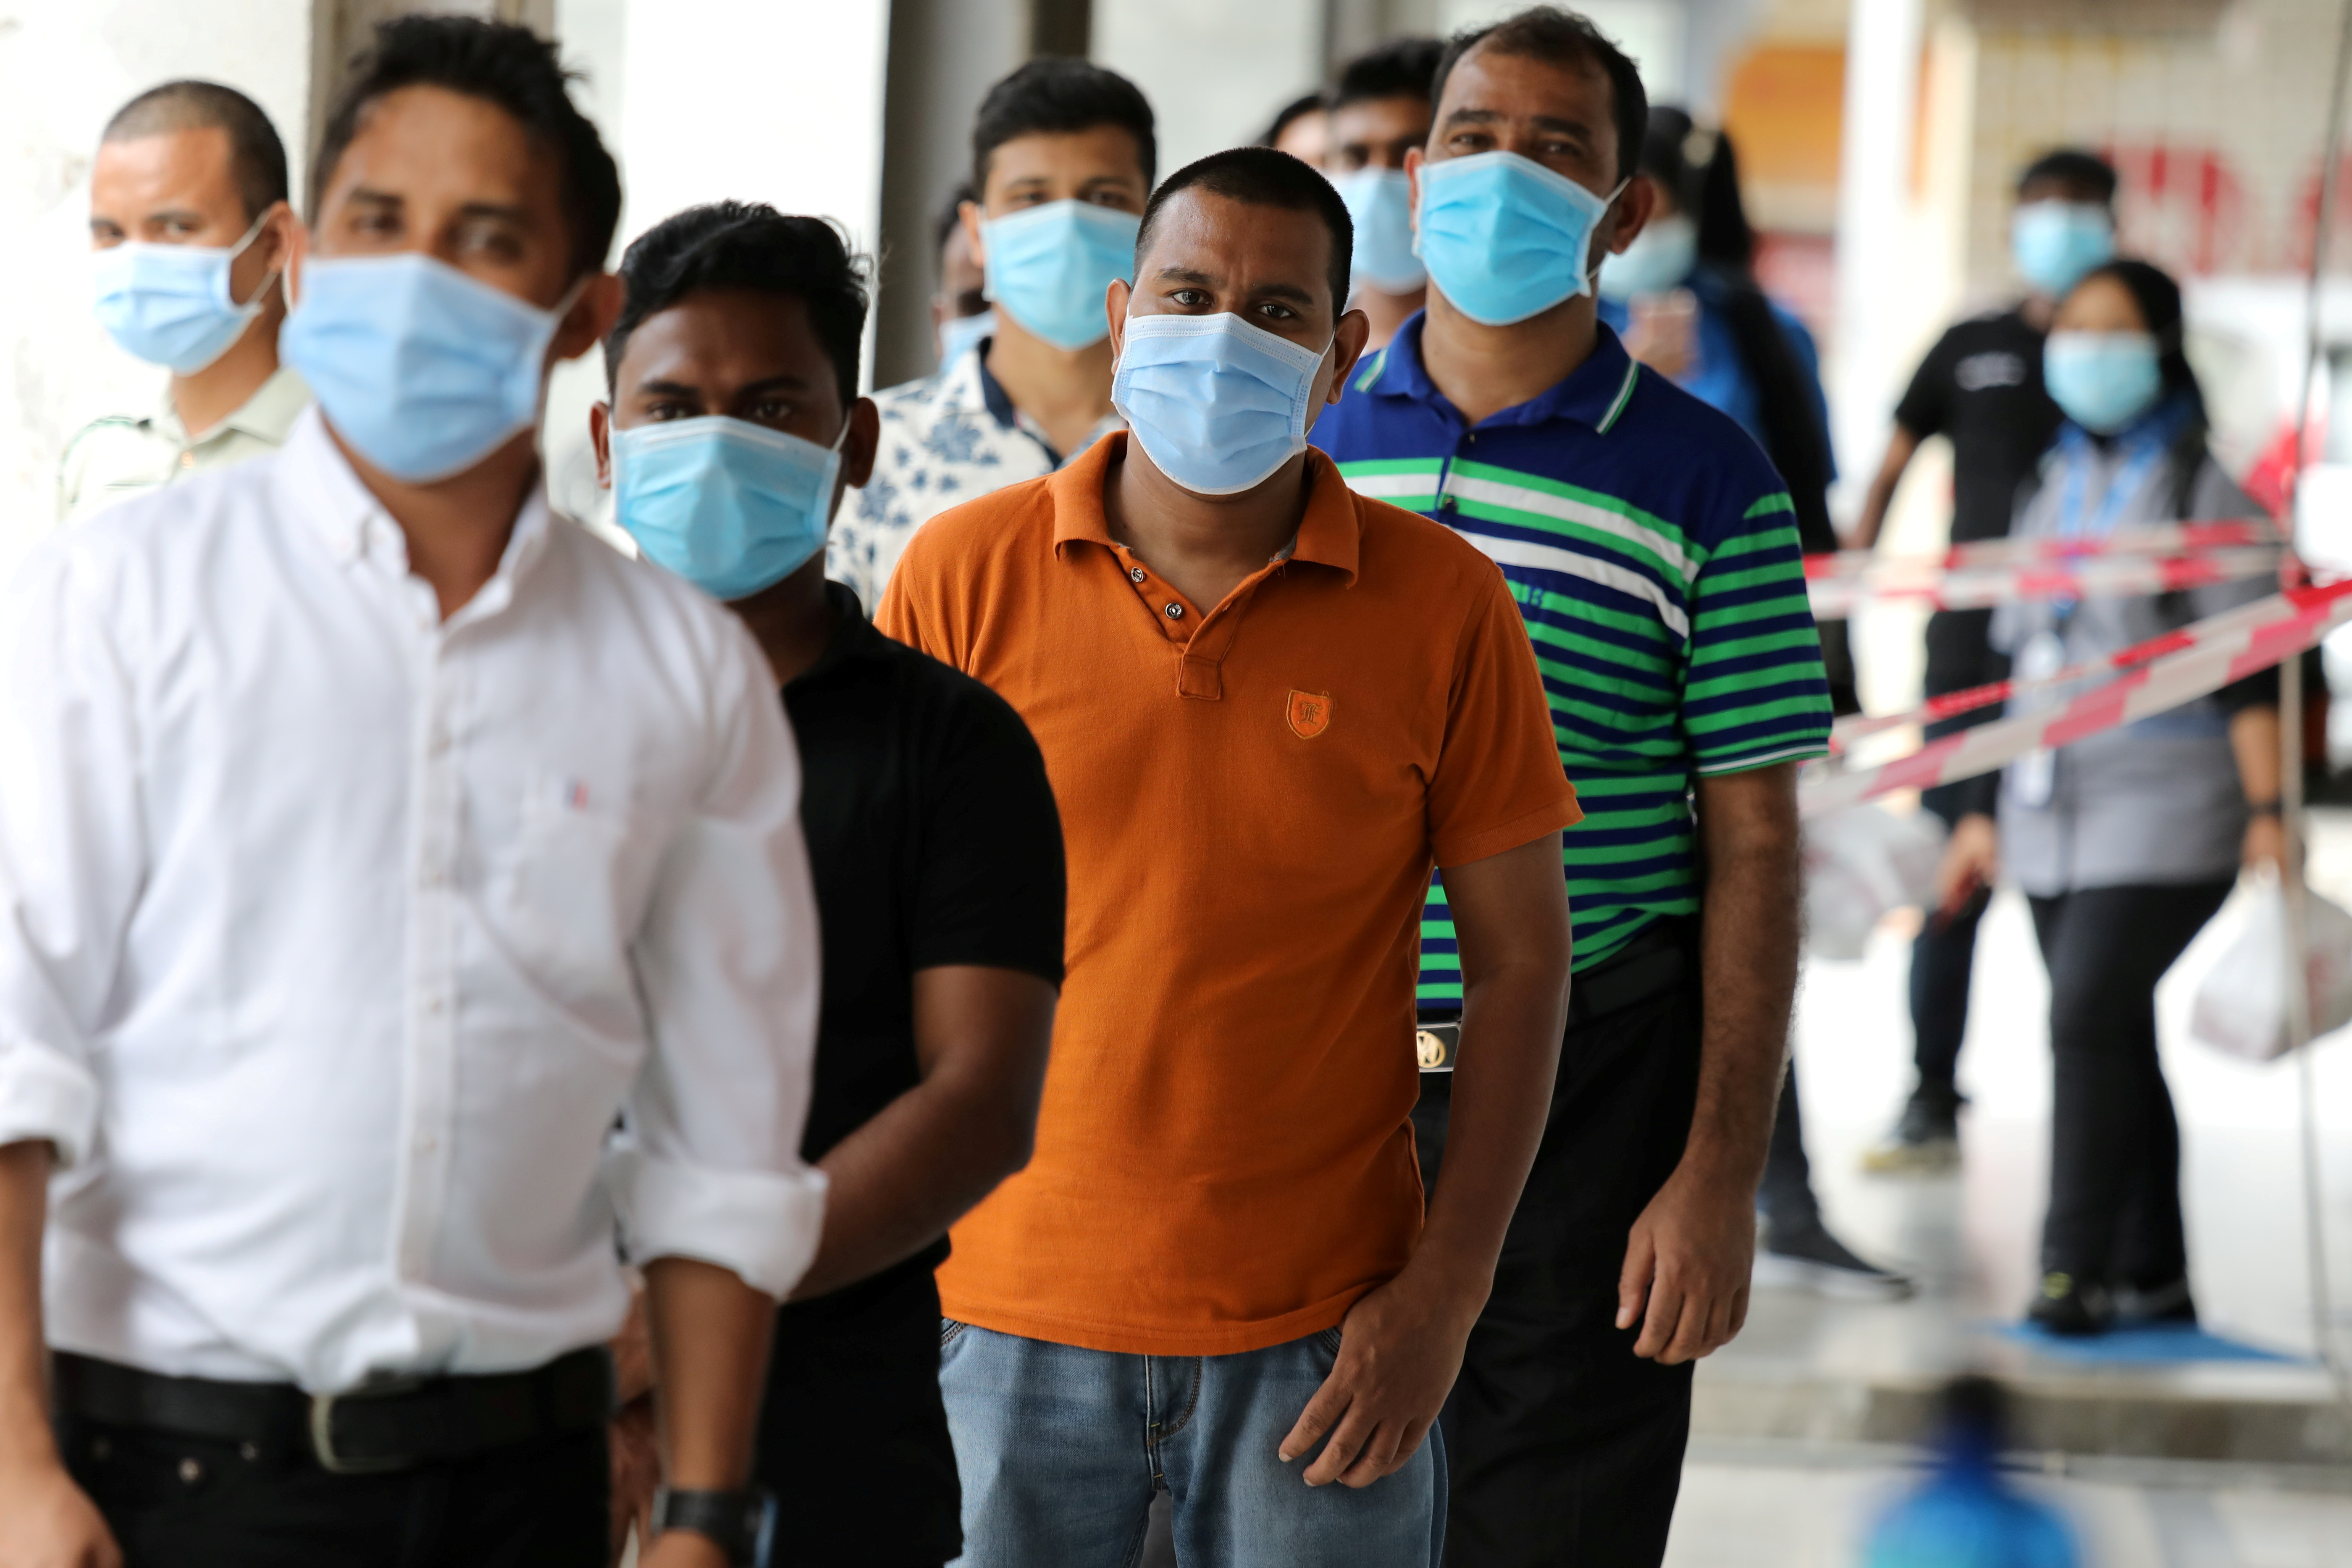 Foreign workers wait in line to be tested for the coronavirus disease (COVID-19) outside a clinic in Kajang